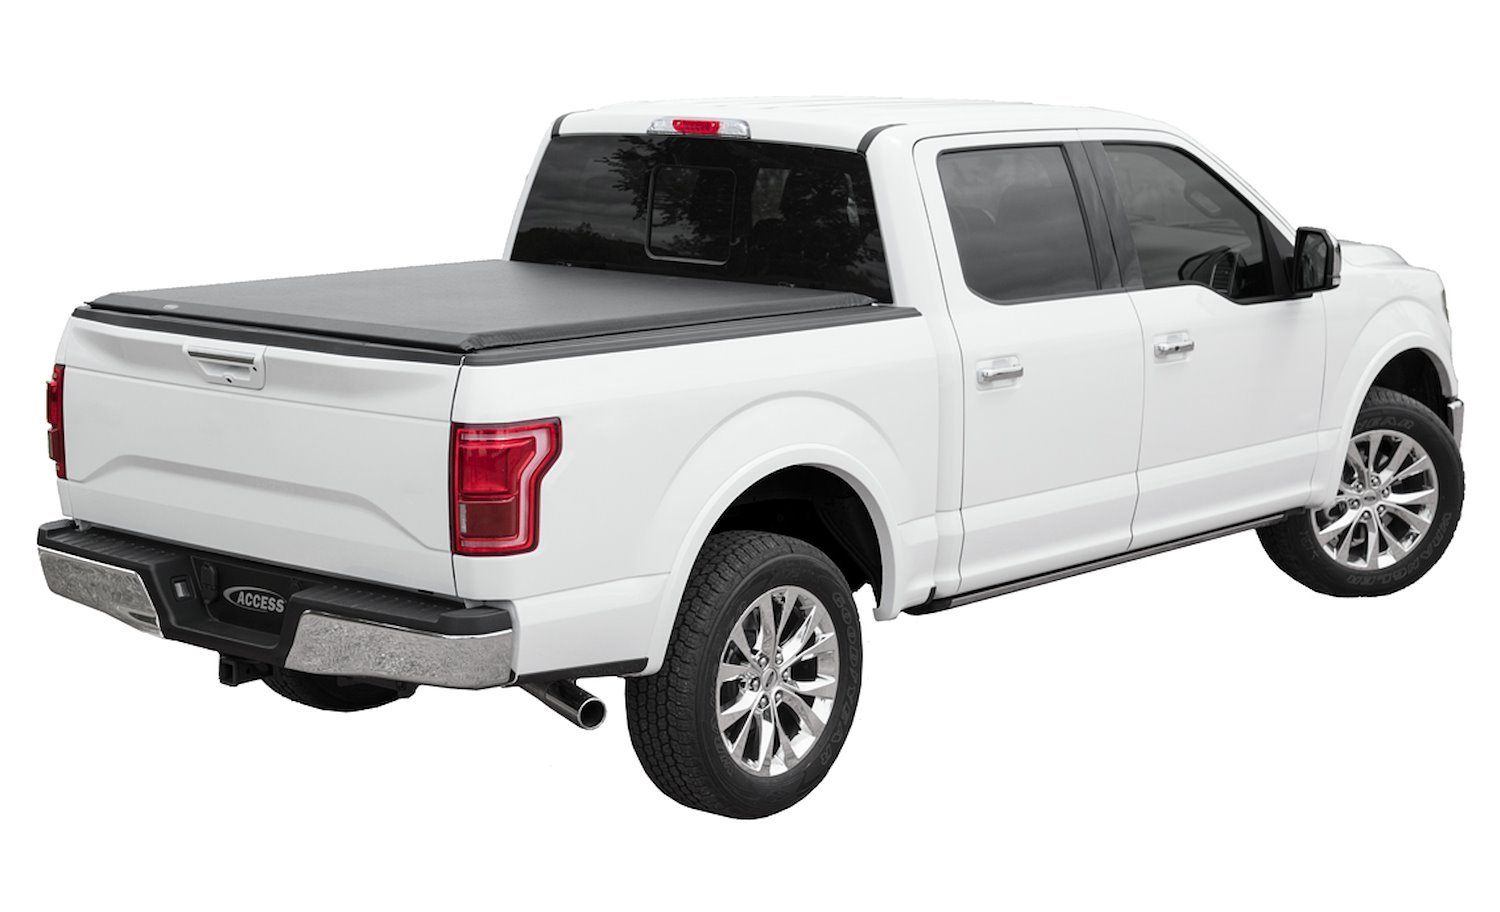 Original Roll-Up Tonneau Cover, Fits Select Ford F-150, with 5 ft. 6 in. Bed